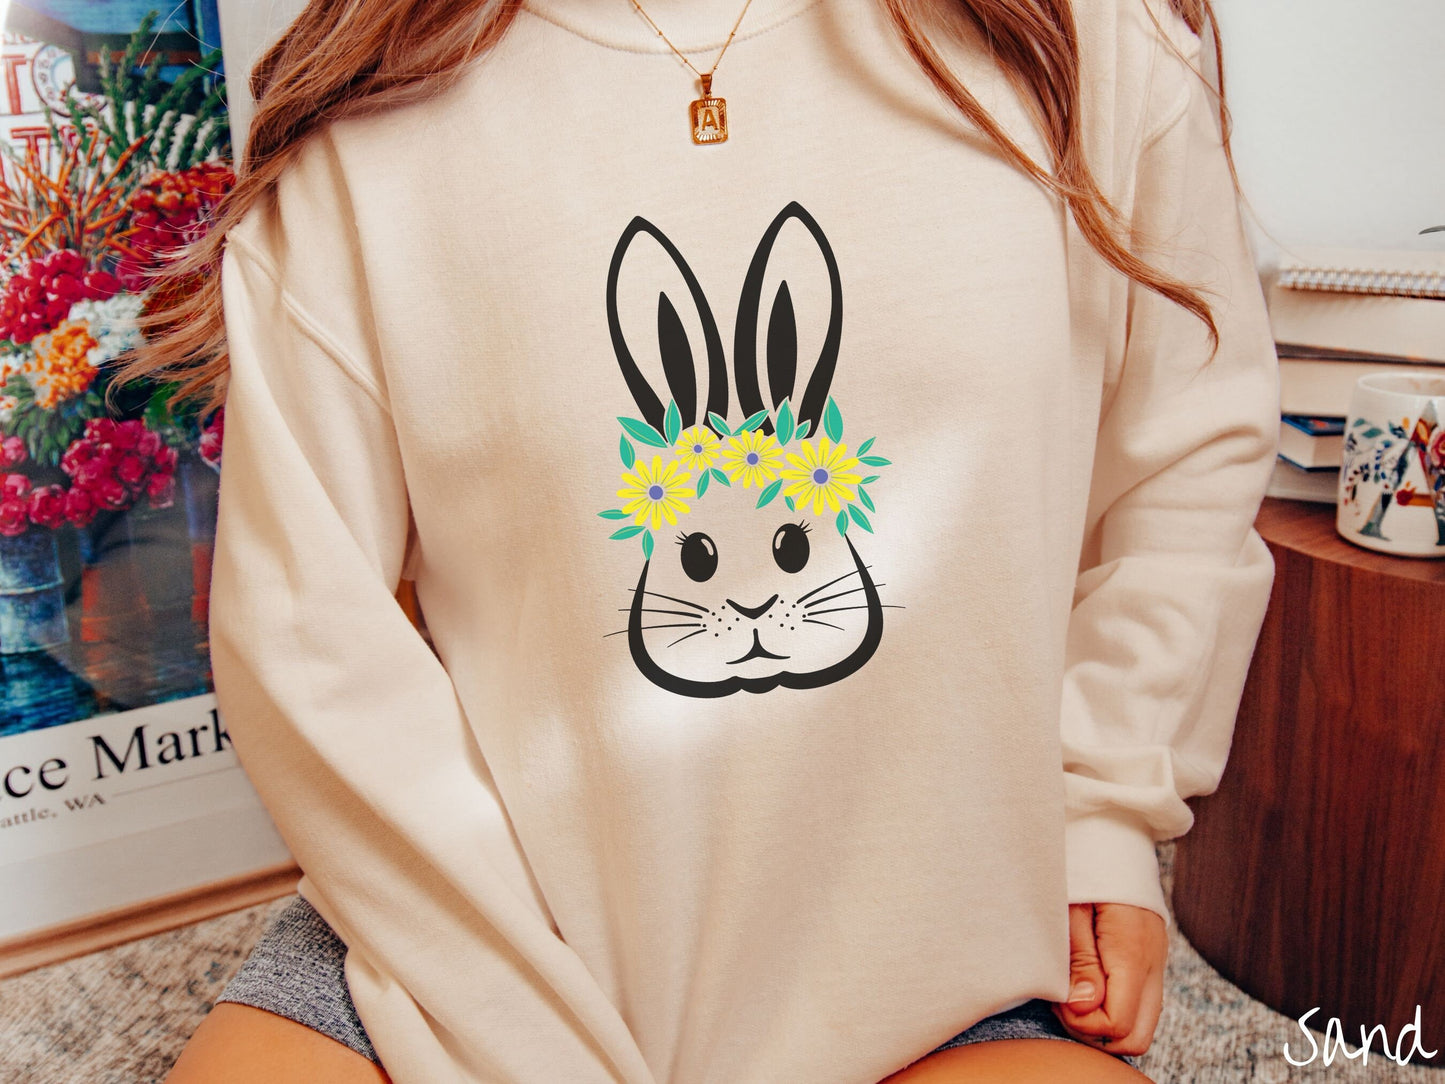 A woman wearing a cute, vintage sand colored sweatshirt with a black outline of a bunny rabbit with eyelashes and whiskers that has a yellow and purple flower headband resting below its large ears.